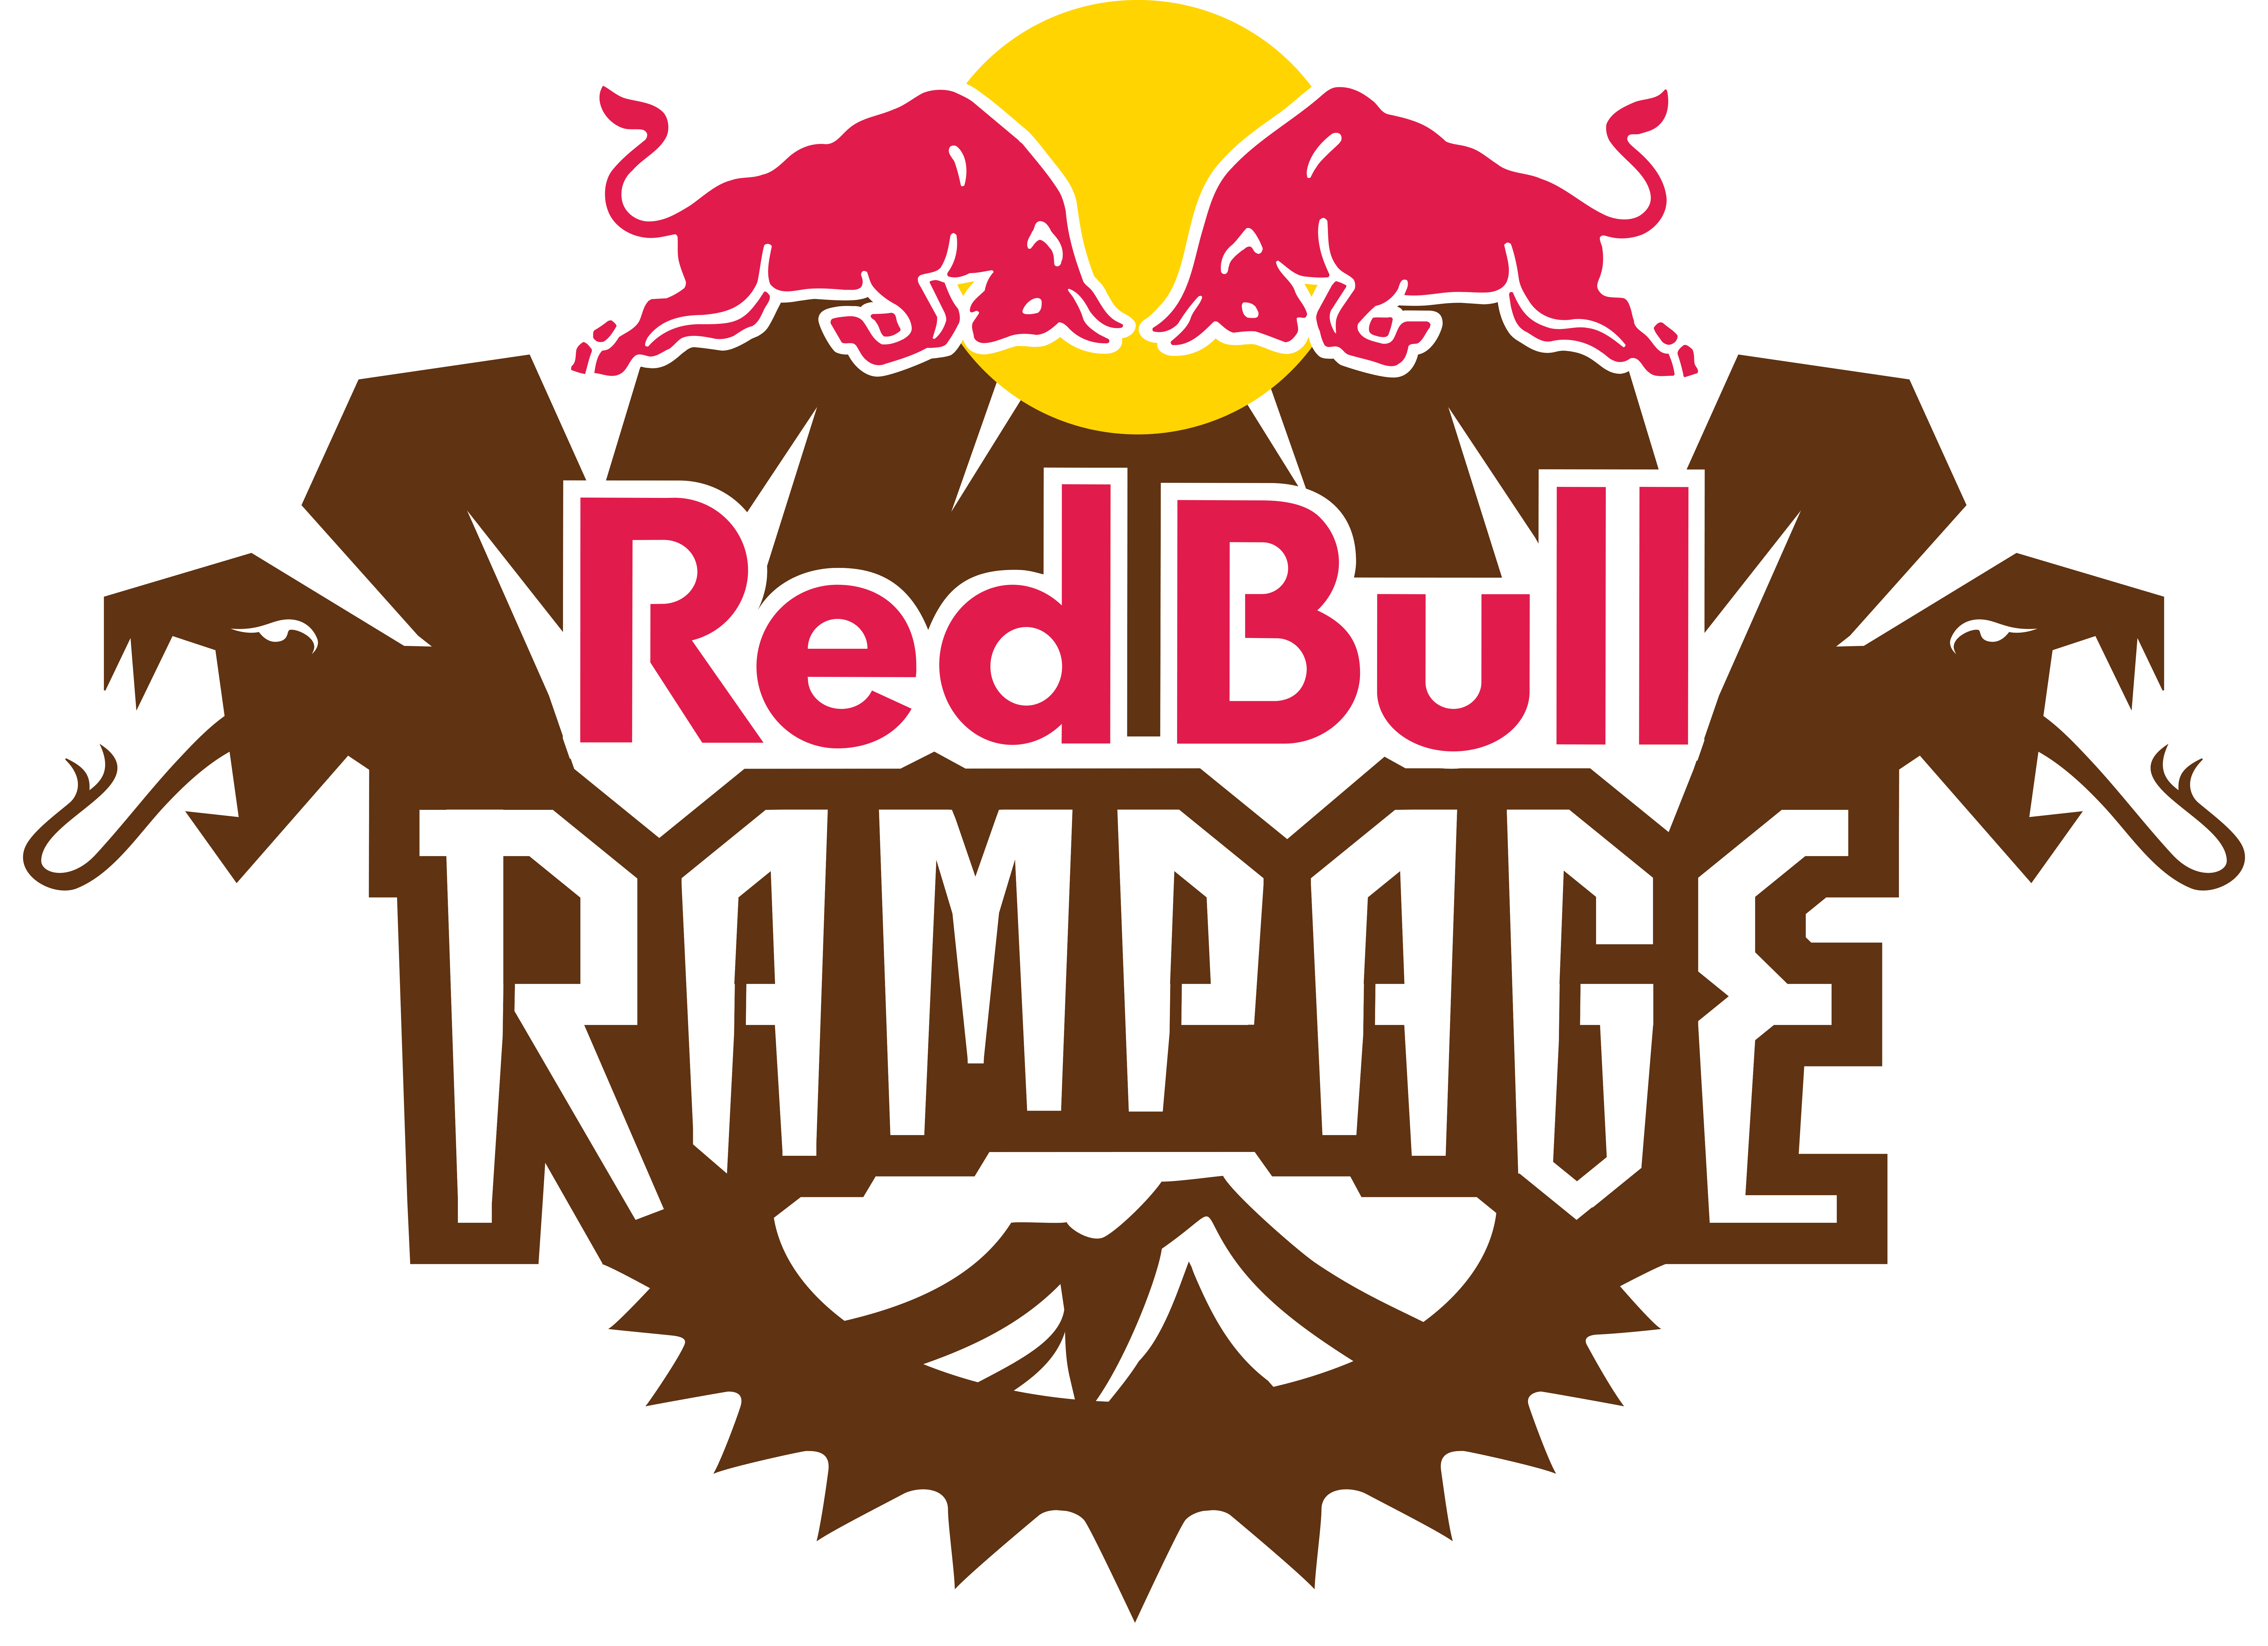 Phoenix Mixed with Red Bull Logo - Red Bull Rampage 2018: MTB Freeride live stream